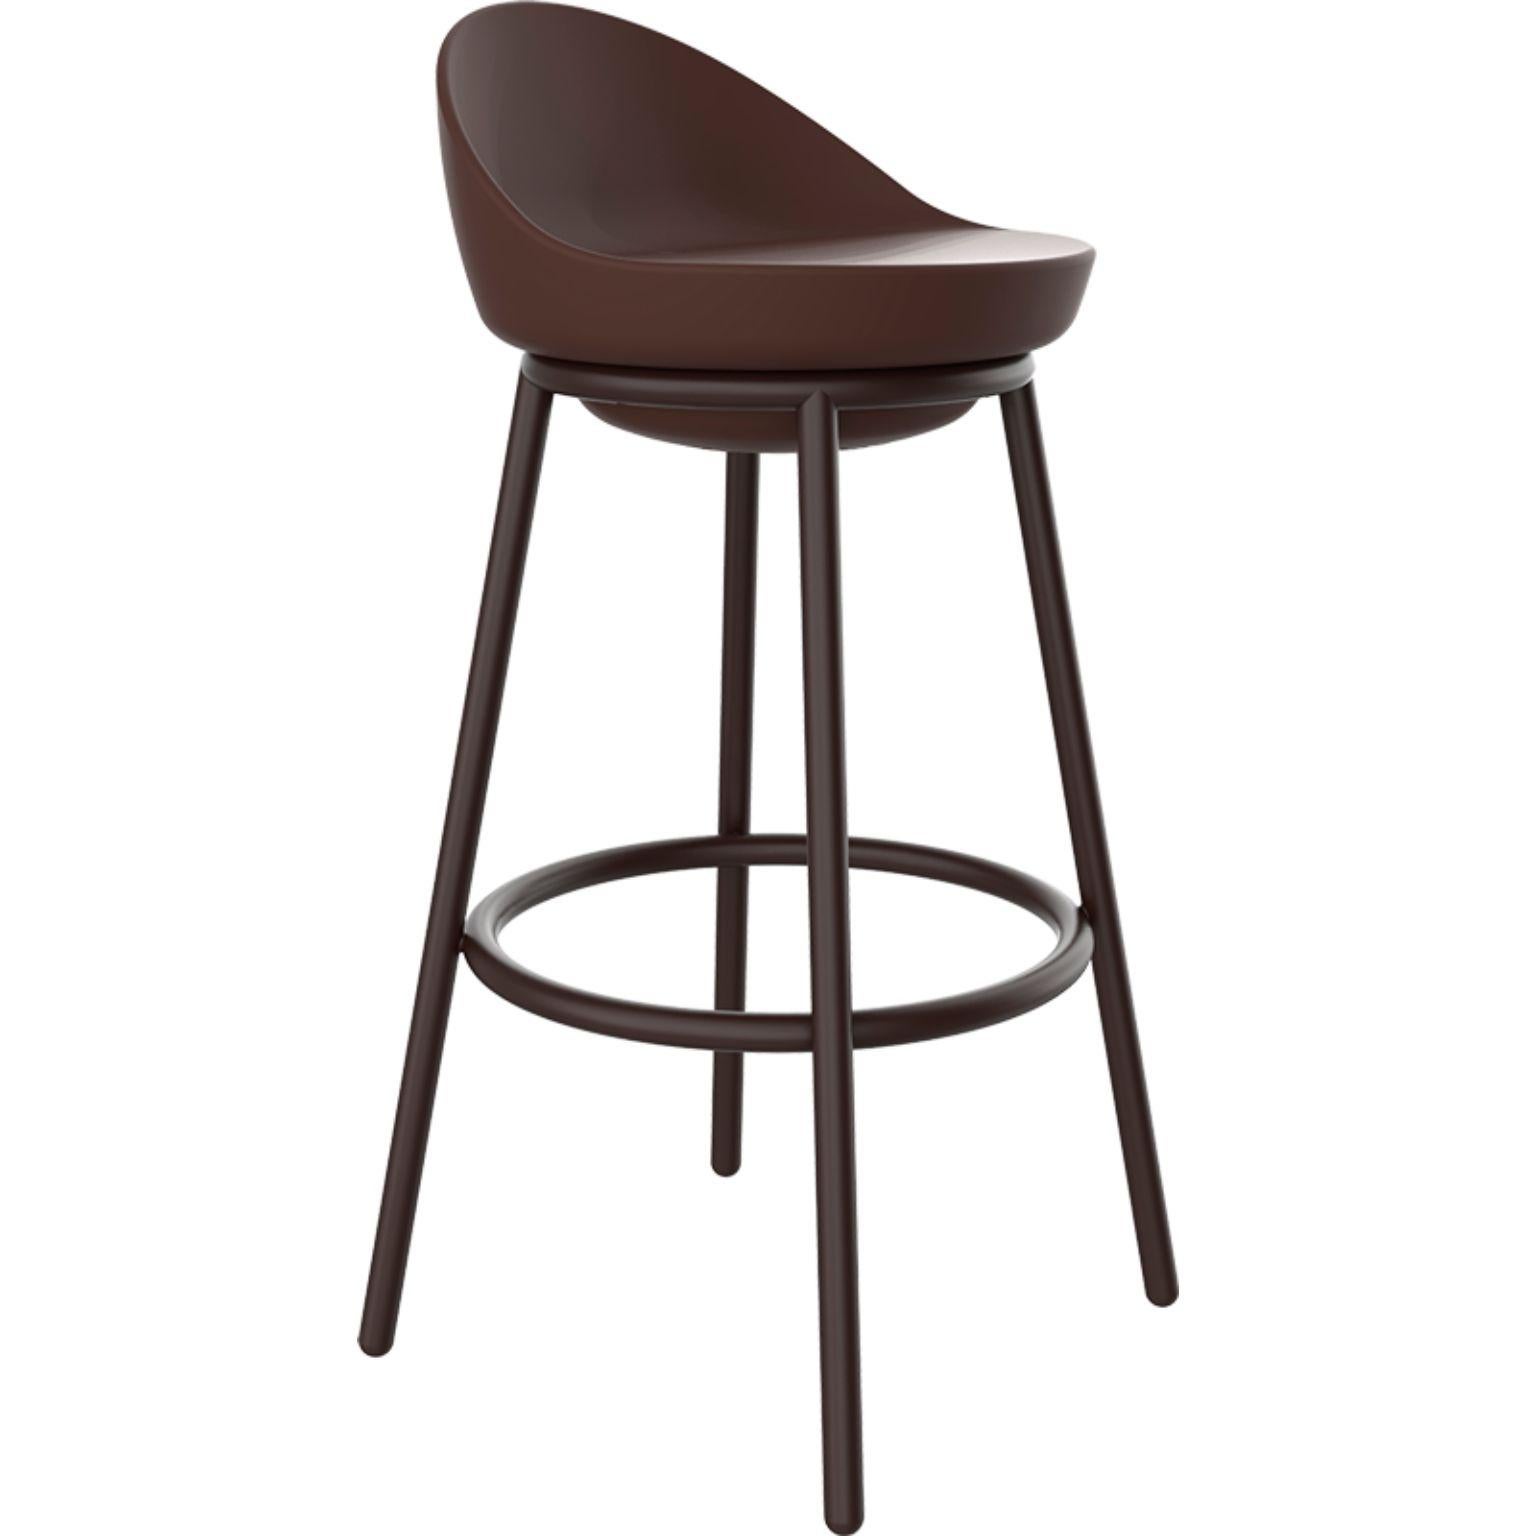 Lace chocolate stool by Mowee.
Dimensions: D43 x H91 cm.
Material: Polyethylene, stainless steel.
Weight: 6.7 kg.
Also Available in different colours and finishes. 

Lace is a collection of furniture made by rotomoulding. Its shape resembles a